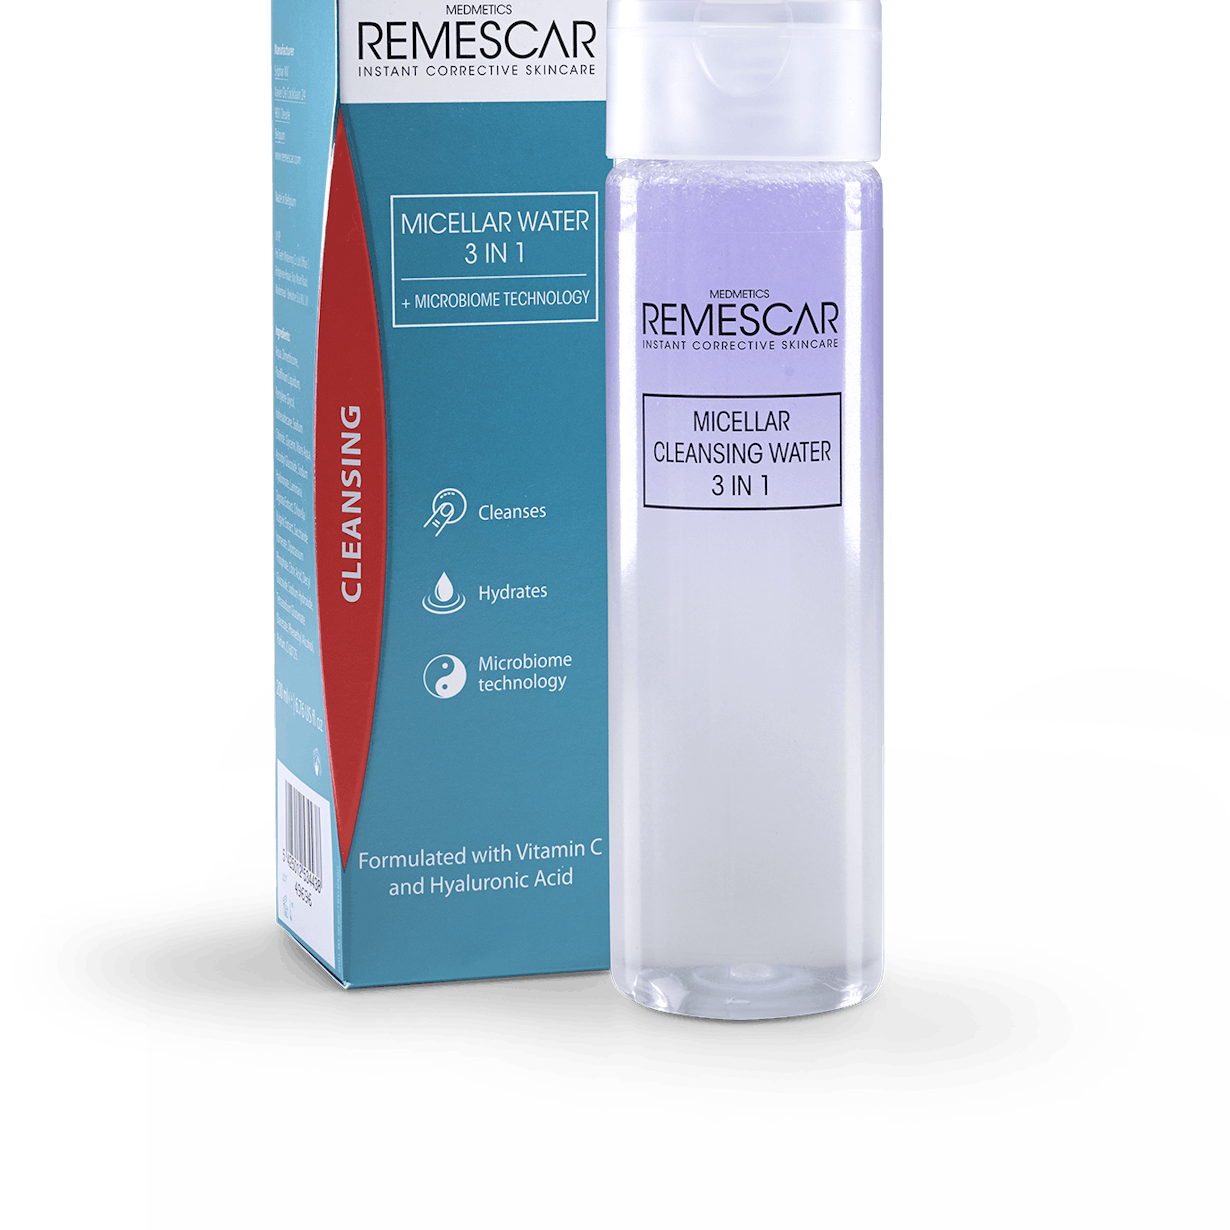 Remescar Micellar Cleansing Water 3 in 1